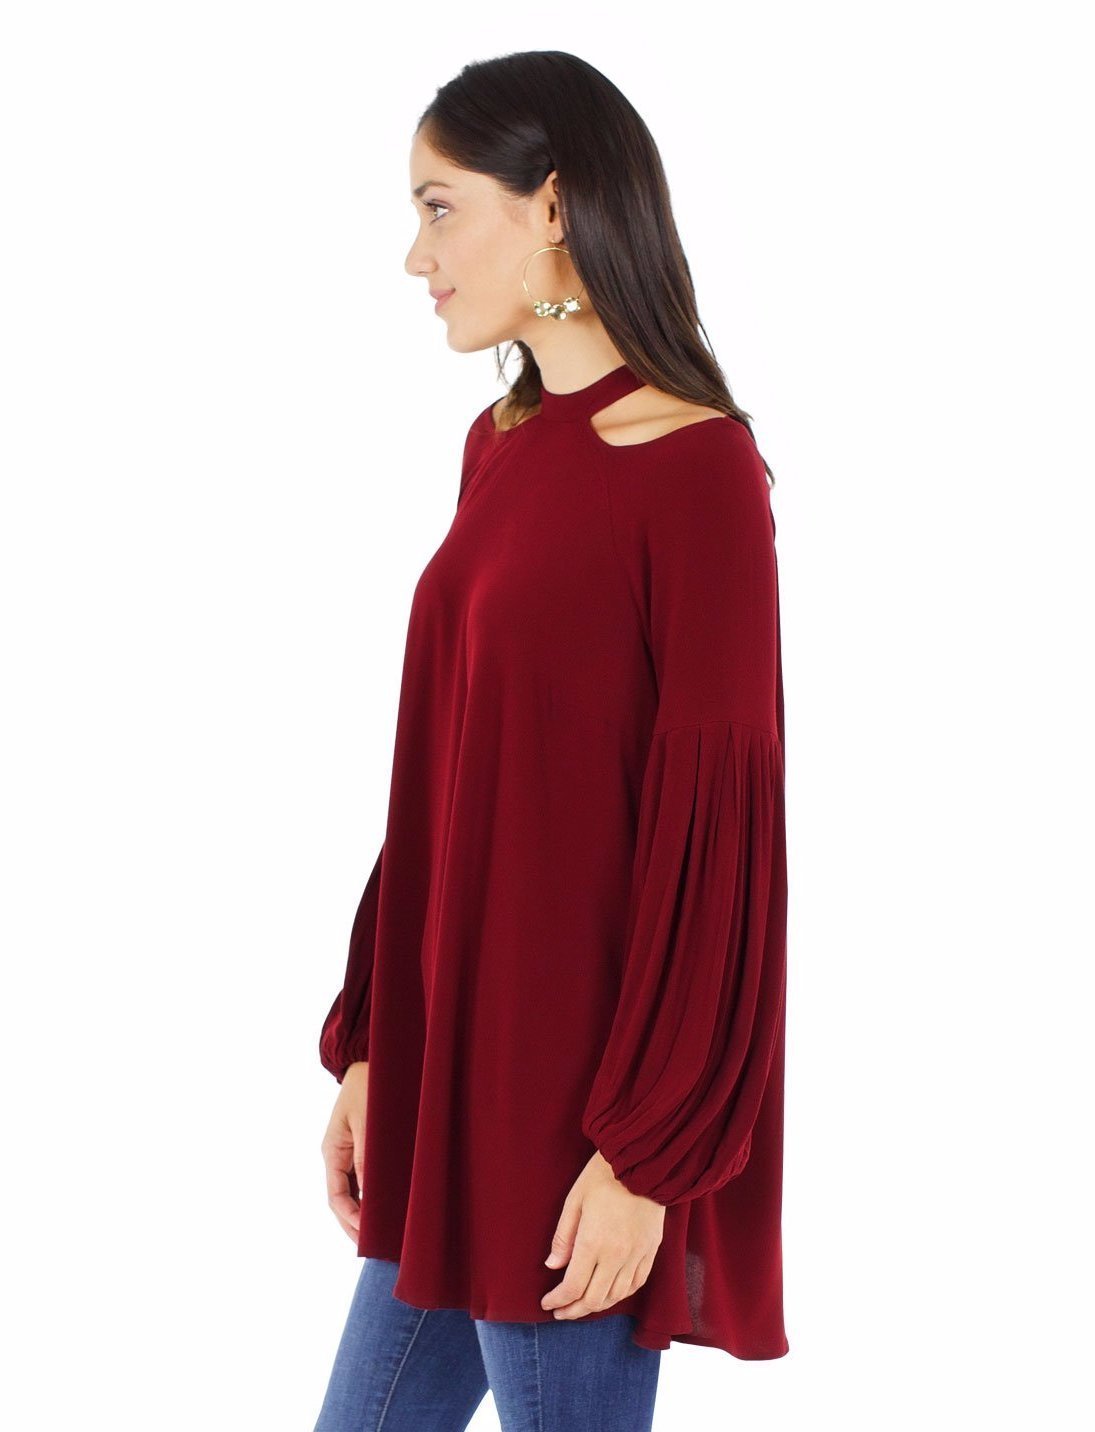 Women outfit in a top rental from Free People called Drift Away Cold Shoulder Tunic